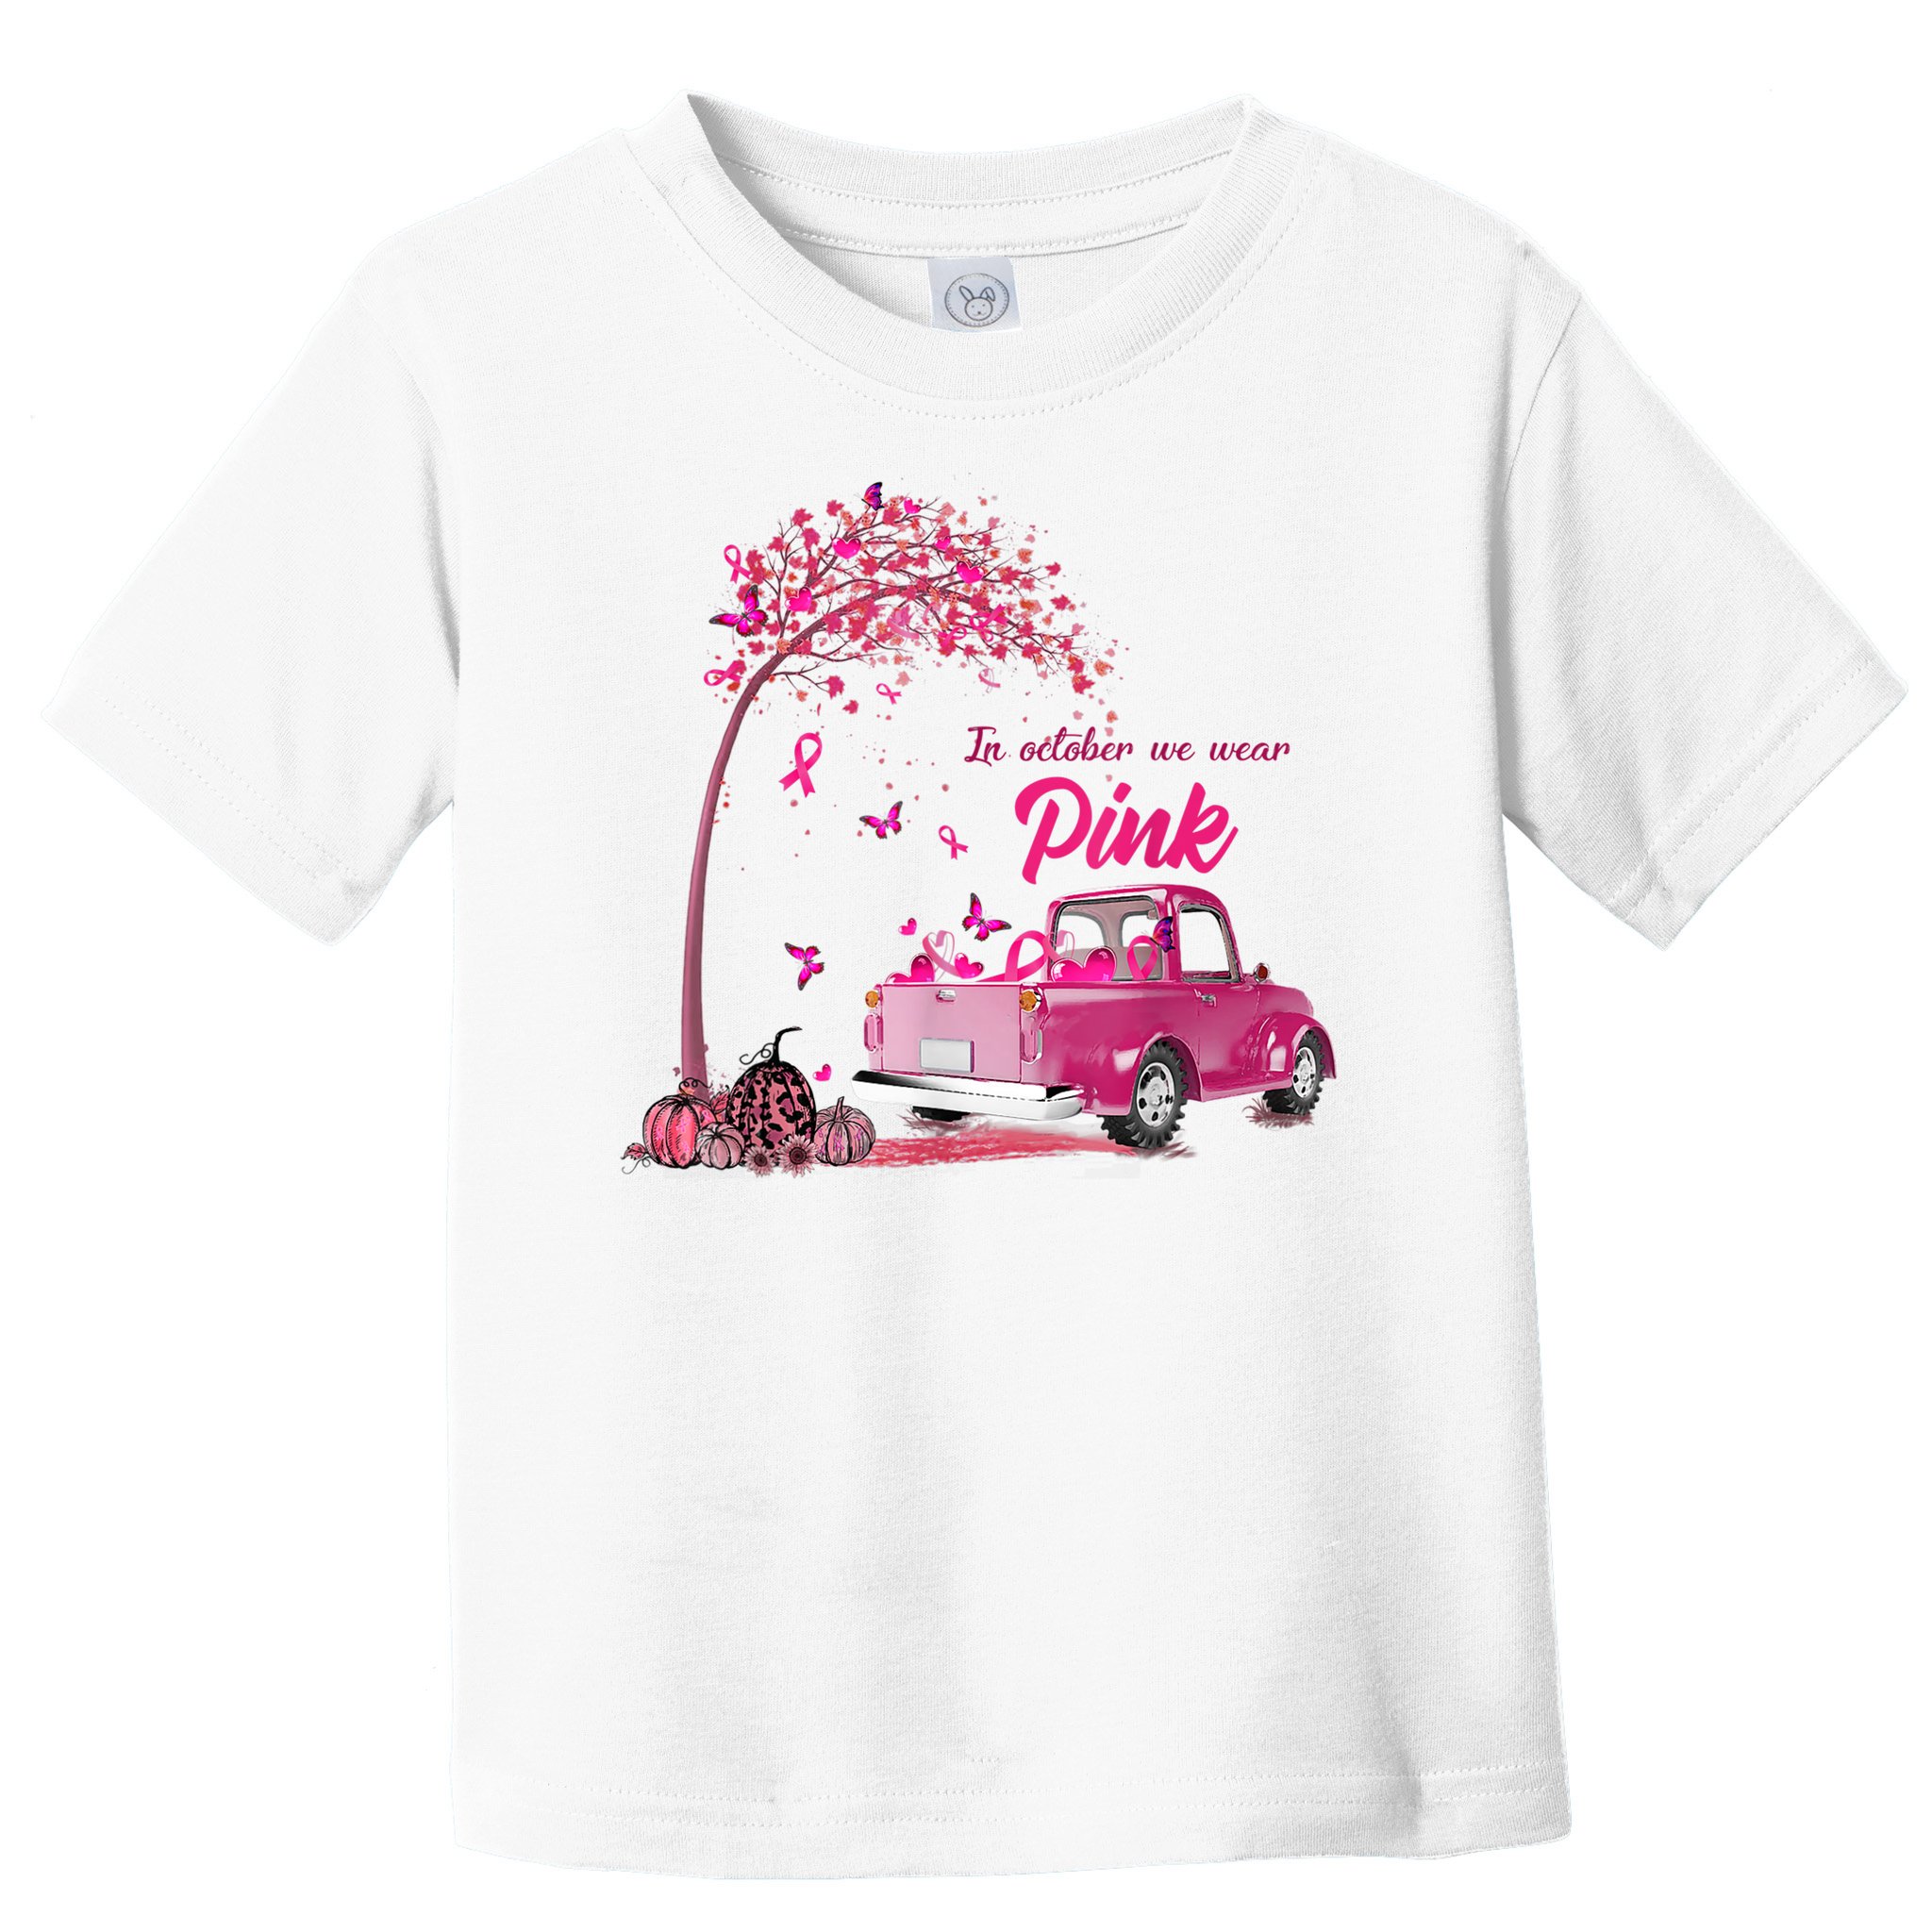 in October We Wear Pink Trendy Unisex T Shirt, Breast Cancer Awareness  Shirt, Pink Ribbon, Breast Cancer, Cancer Support Gift 